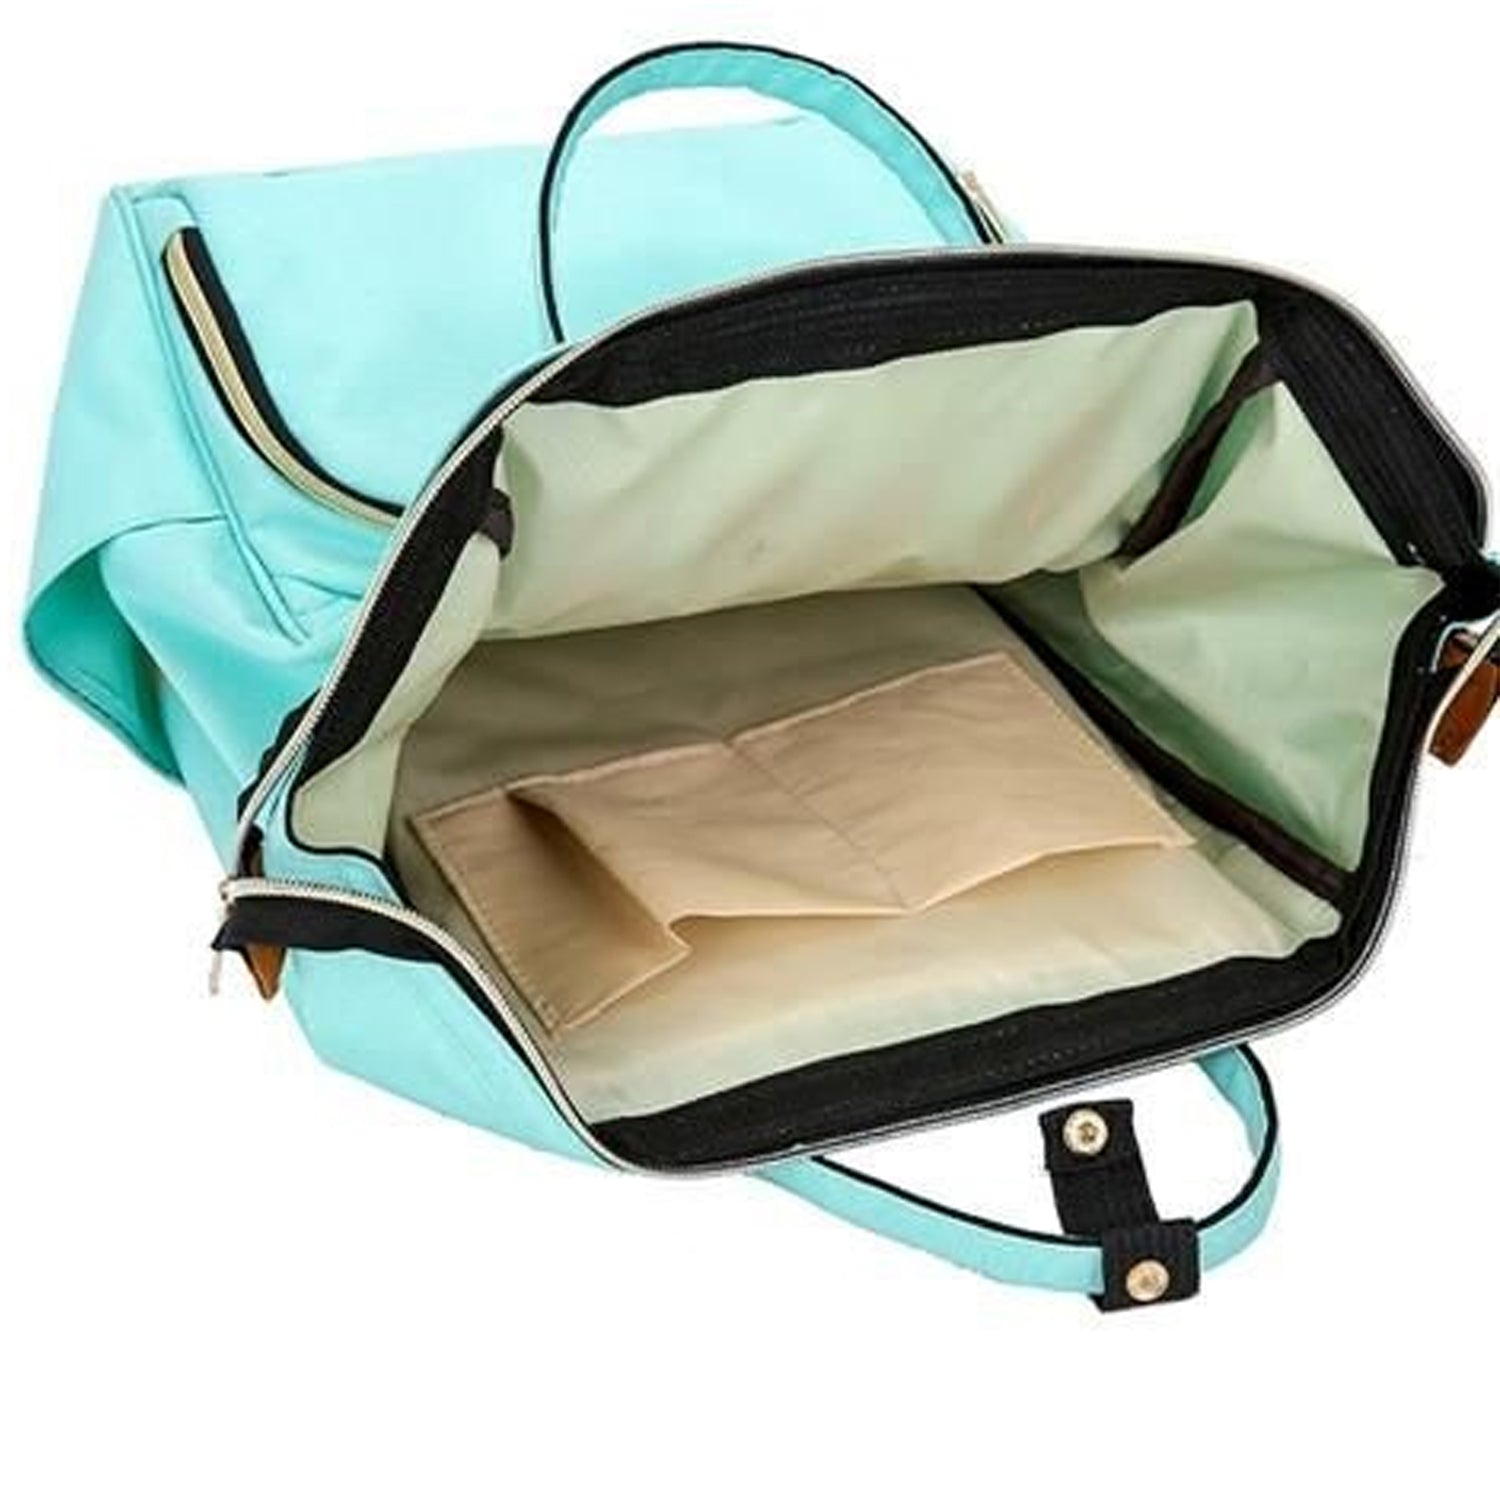 Baby Diaper Bag, Mothers Maternity Bags for Travel - Green